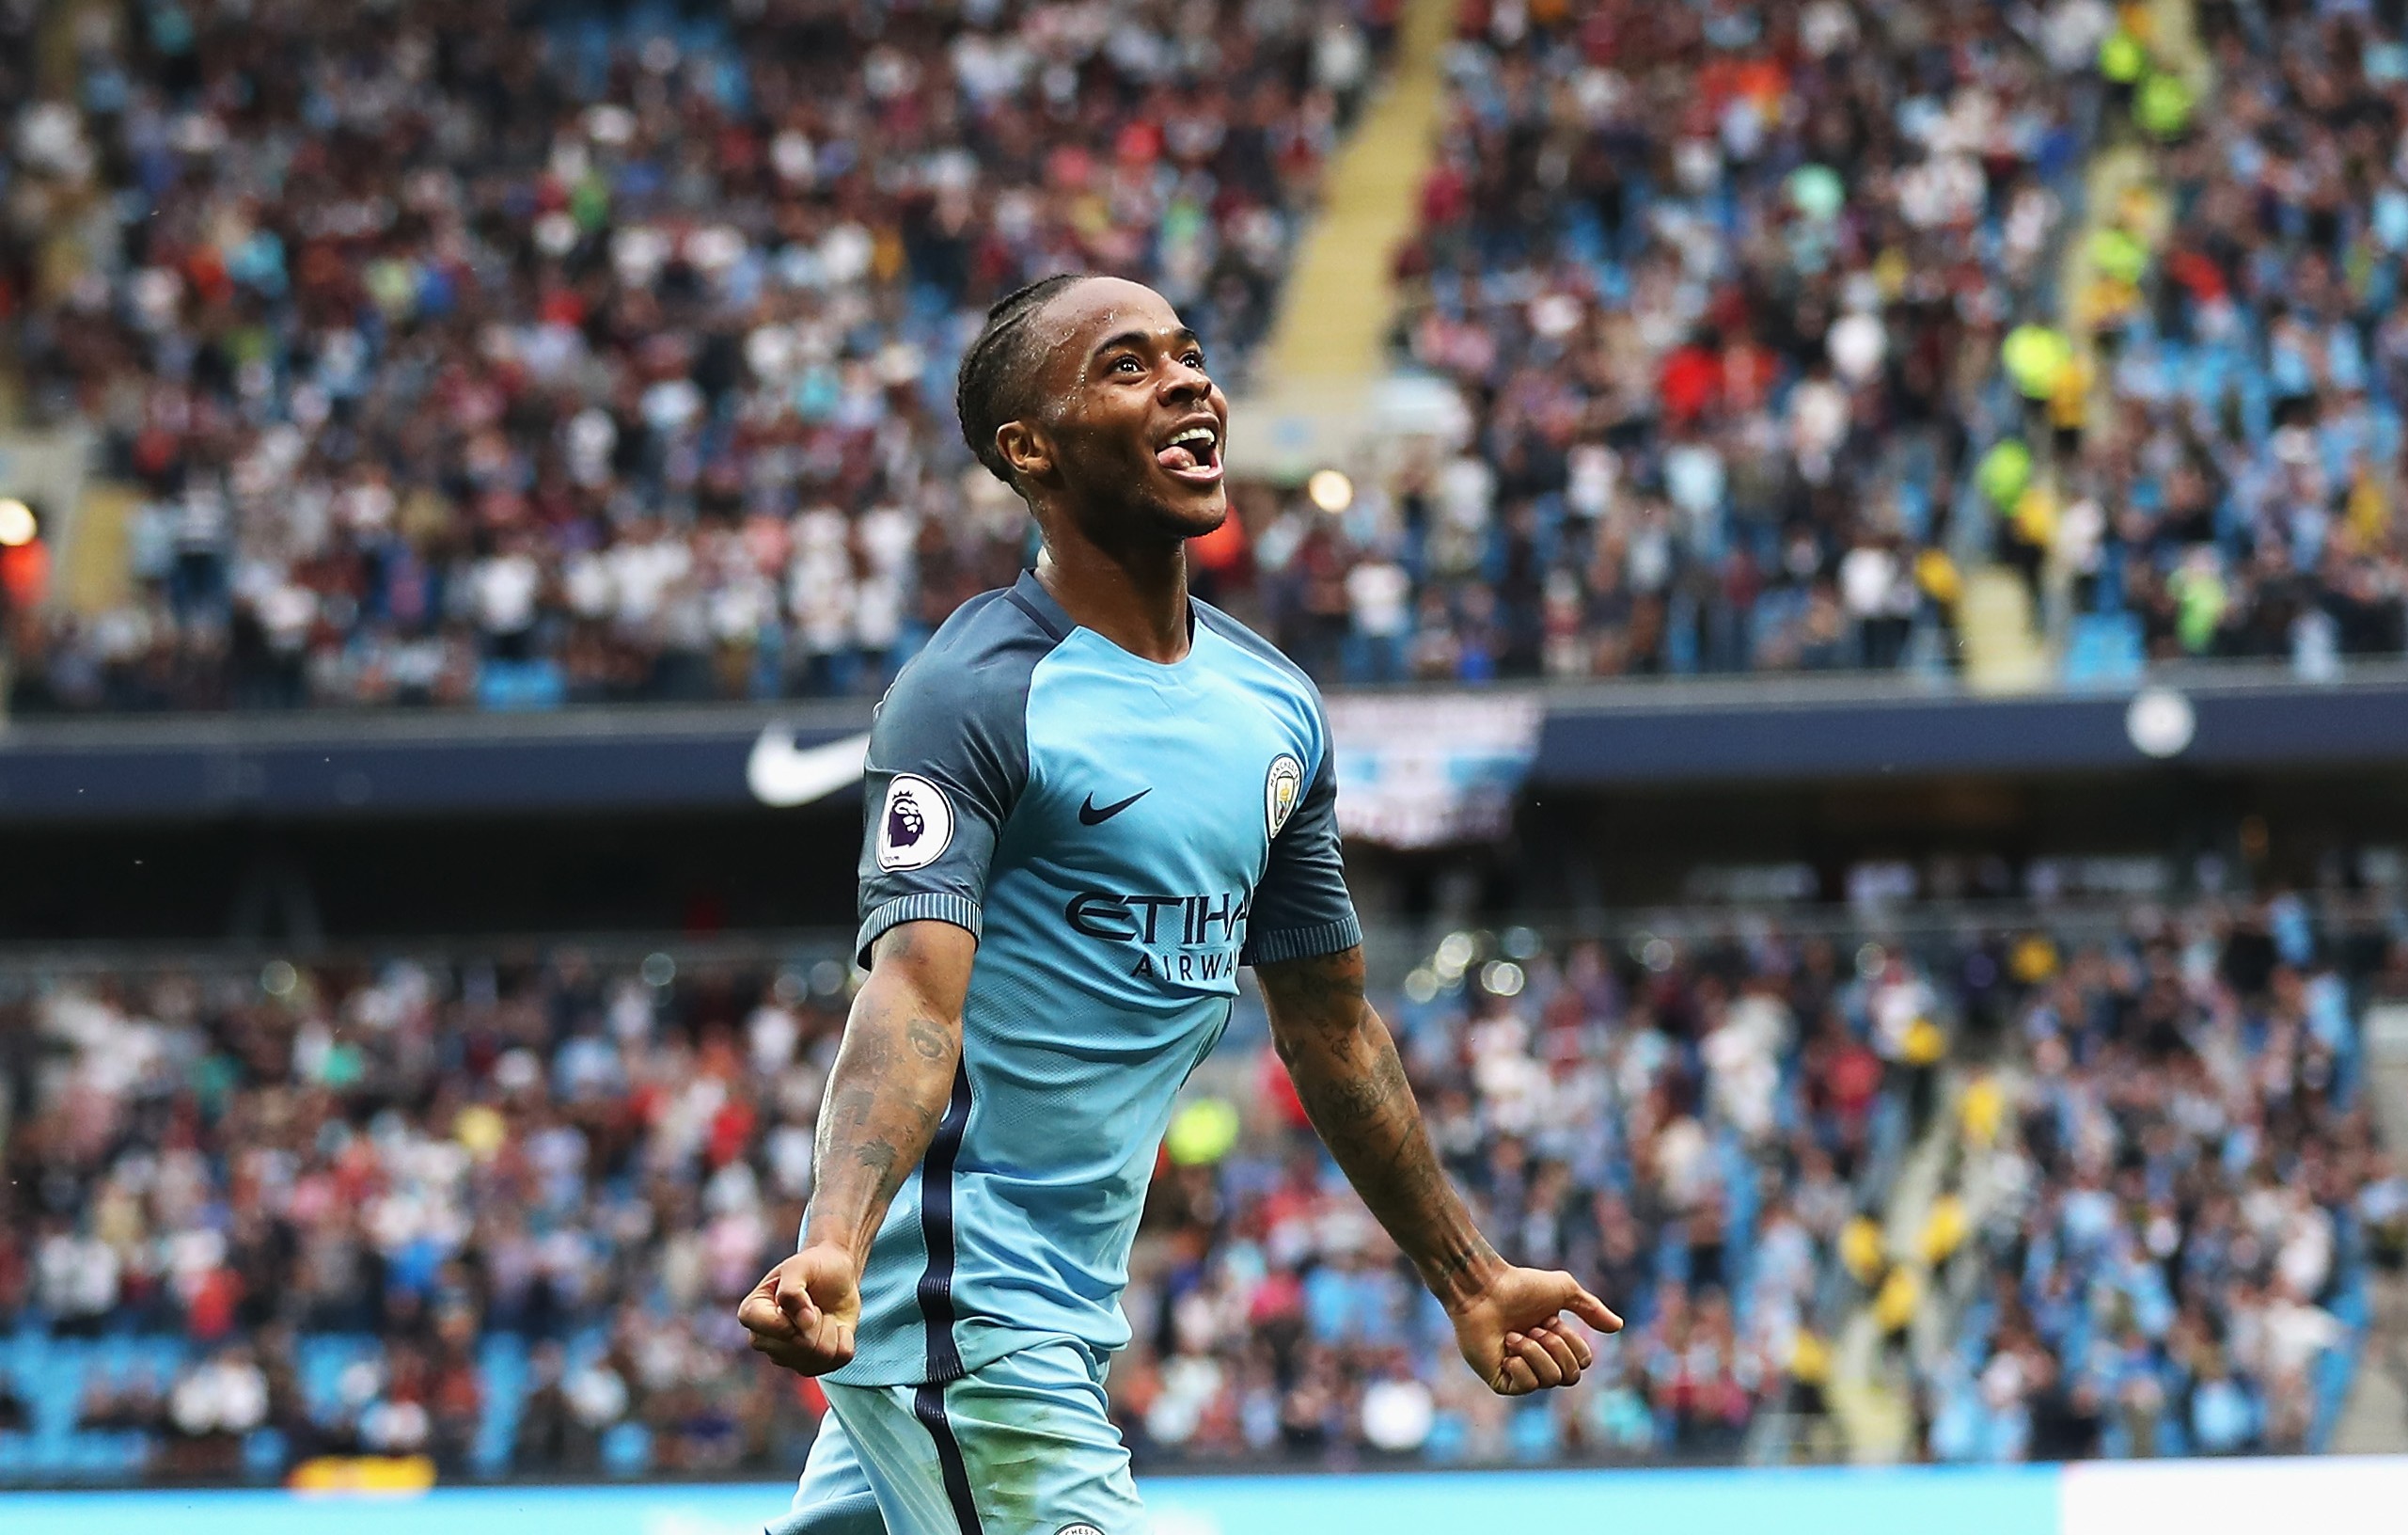 MANCHESTER, ENGLAND - AUGUST 28:  Raheem Sterling of Manchester City celebrates scoring his second goal and his team's third with Fernandinho of Manchester City during the Premier League match between Manchester City and West Ham United at Etihad Stadium on August 28, 2016 in Manchester, England.  (Photo by Chris Brunskill/Getty Images)